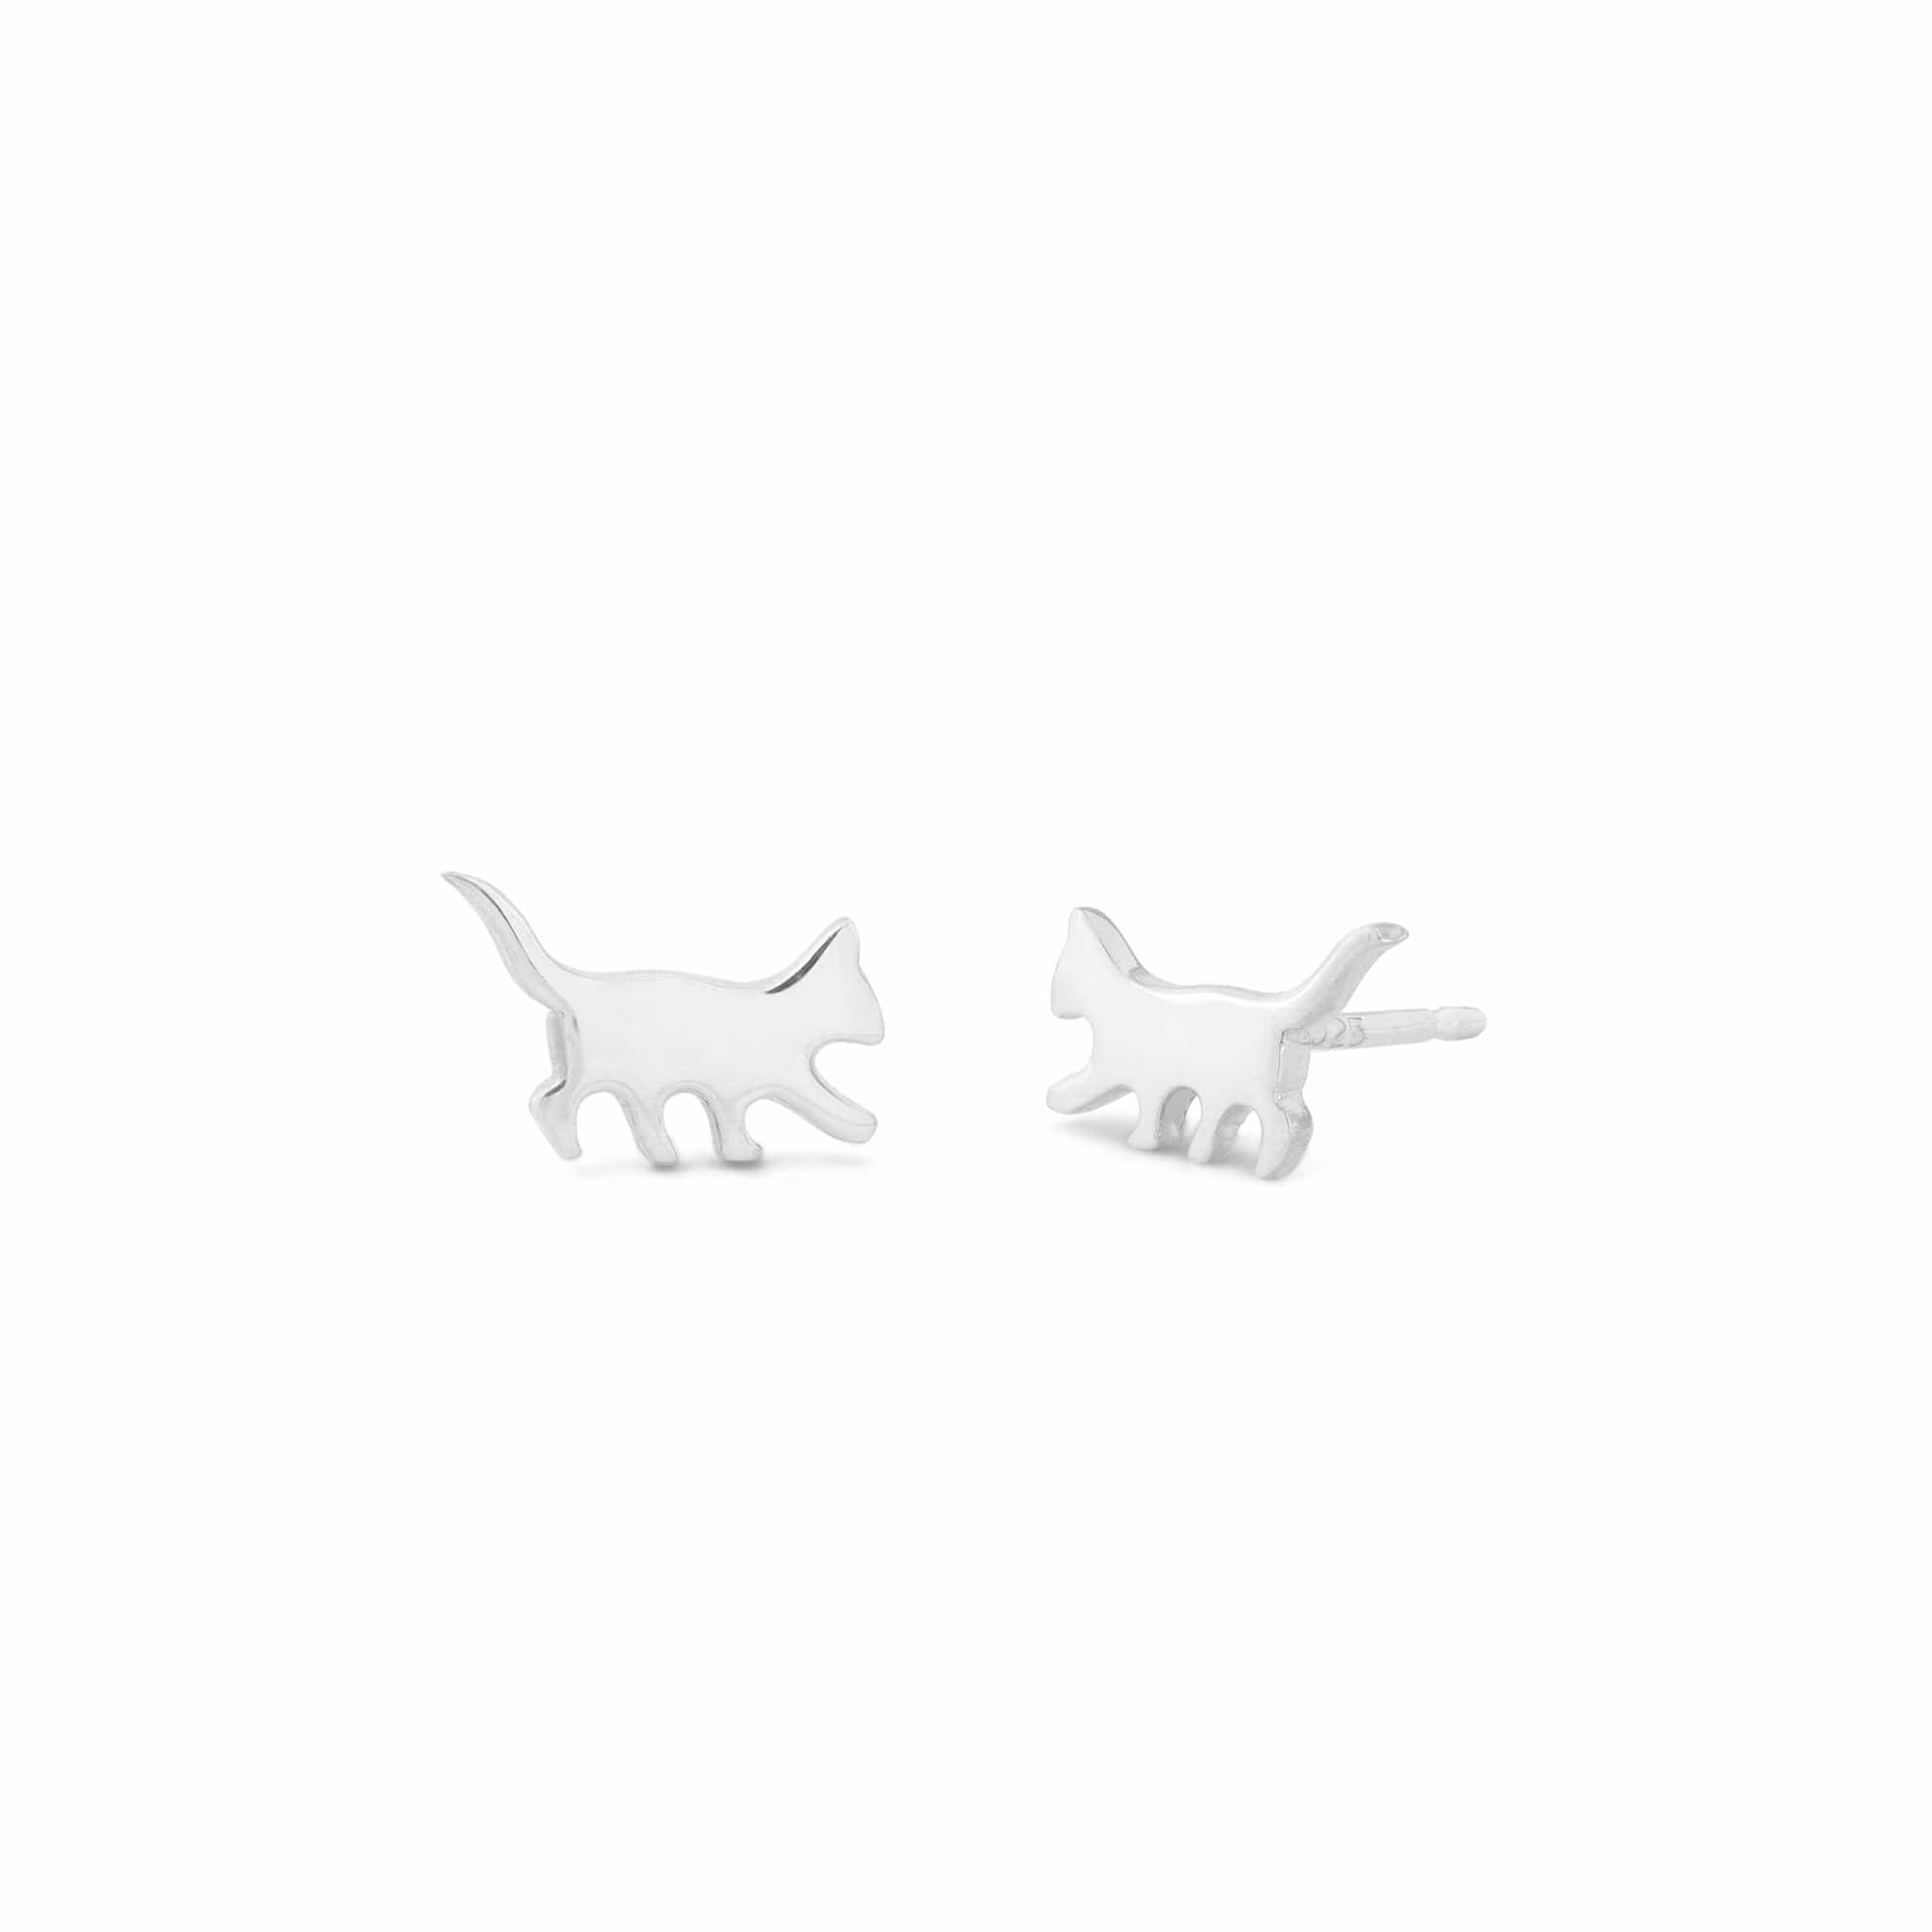 Boma Jewelry Earrings Curious Cat Studs